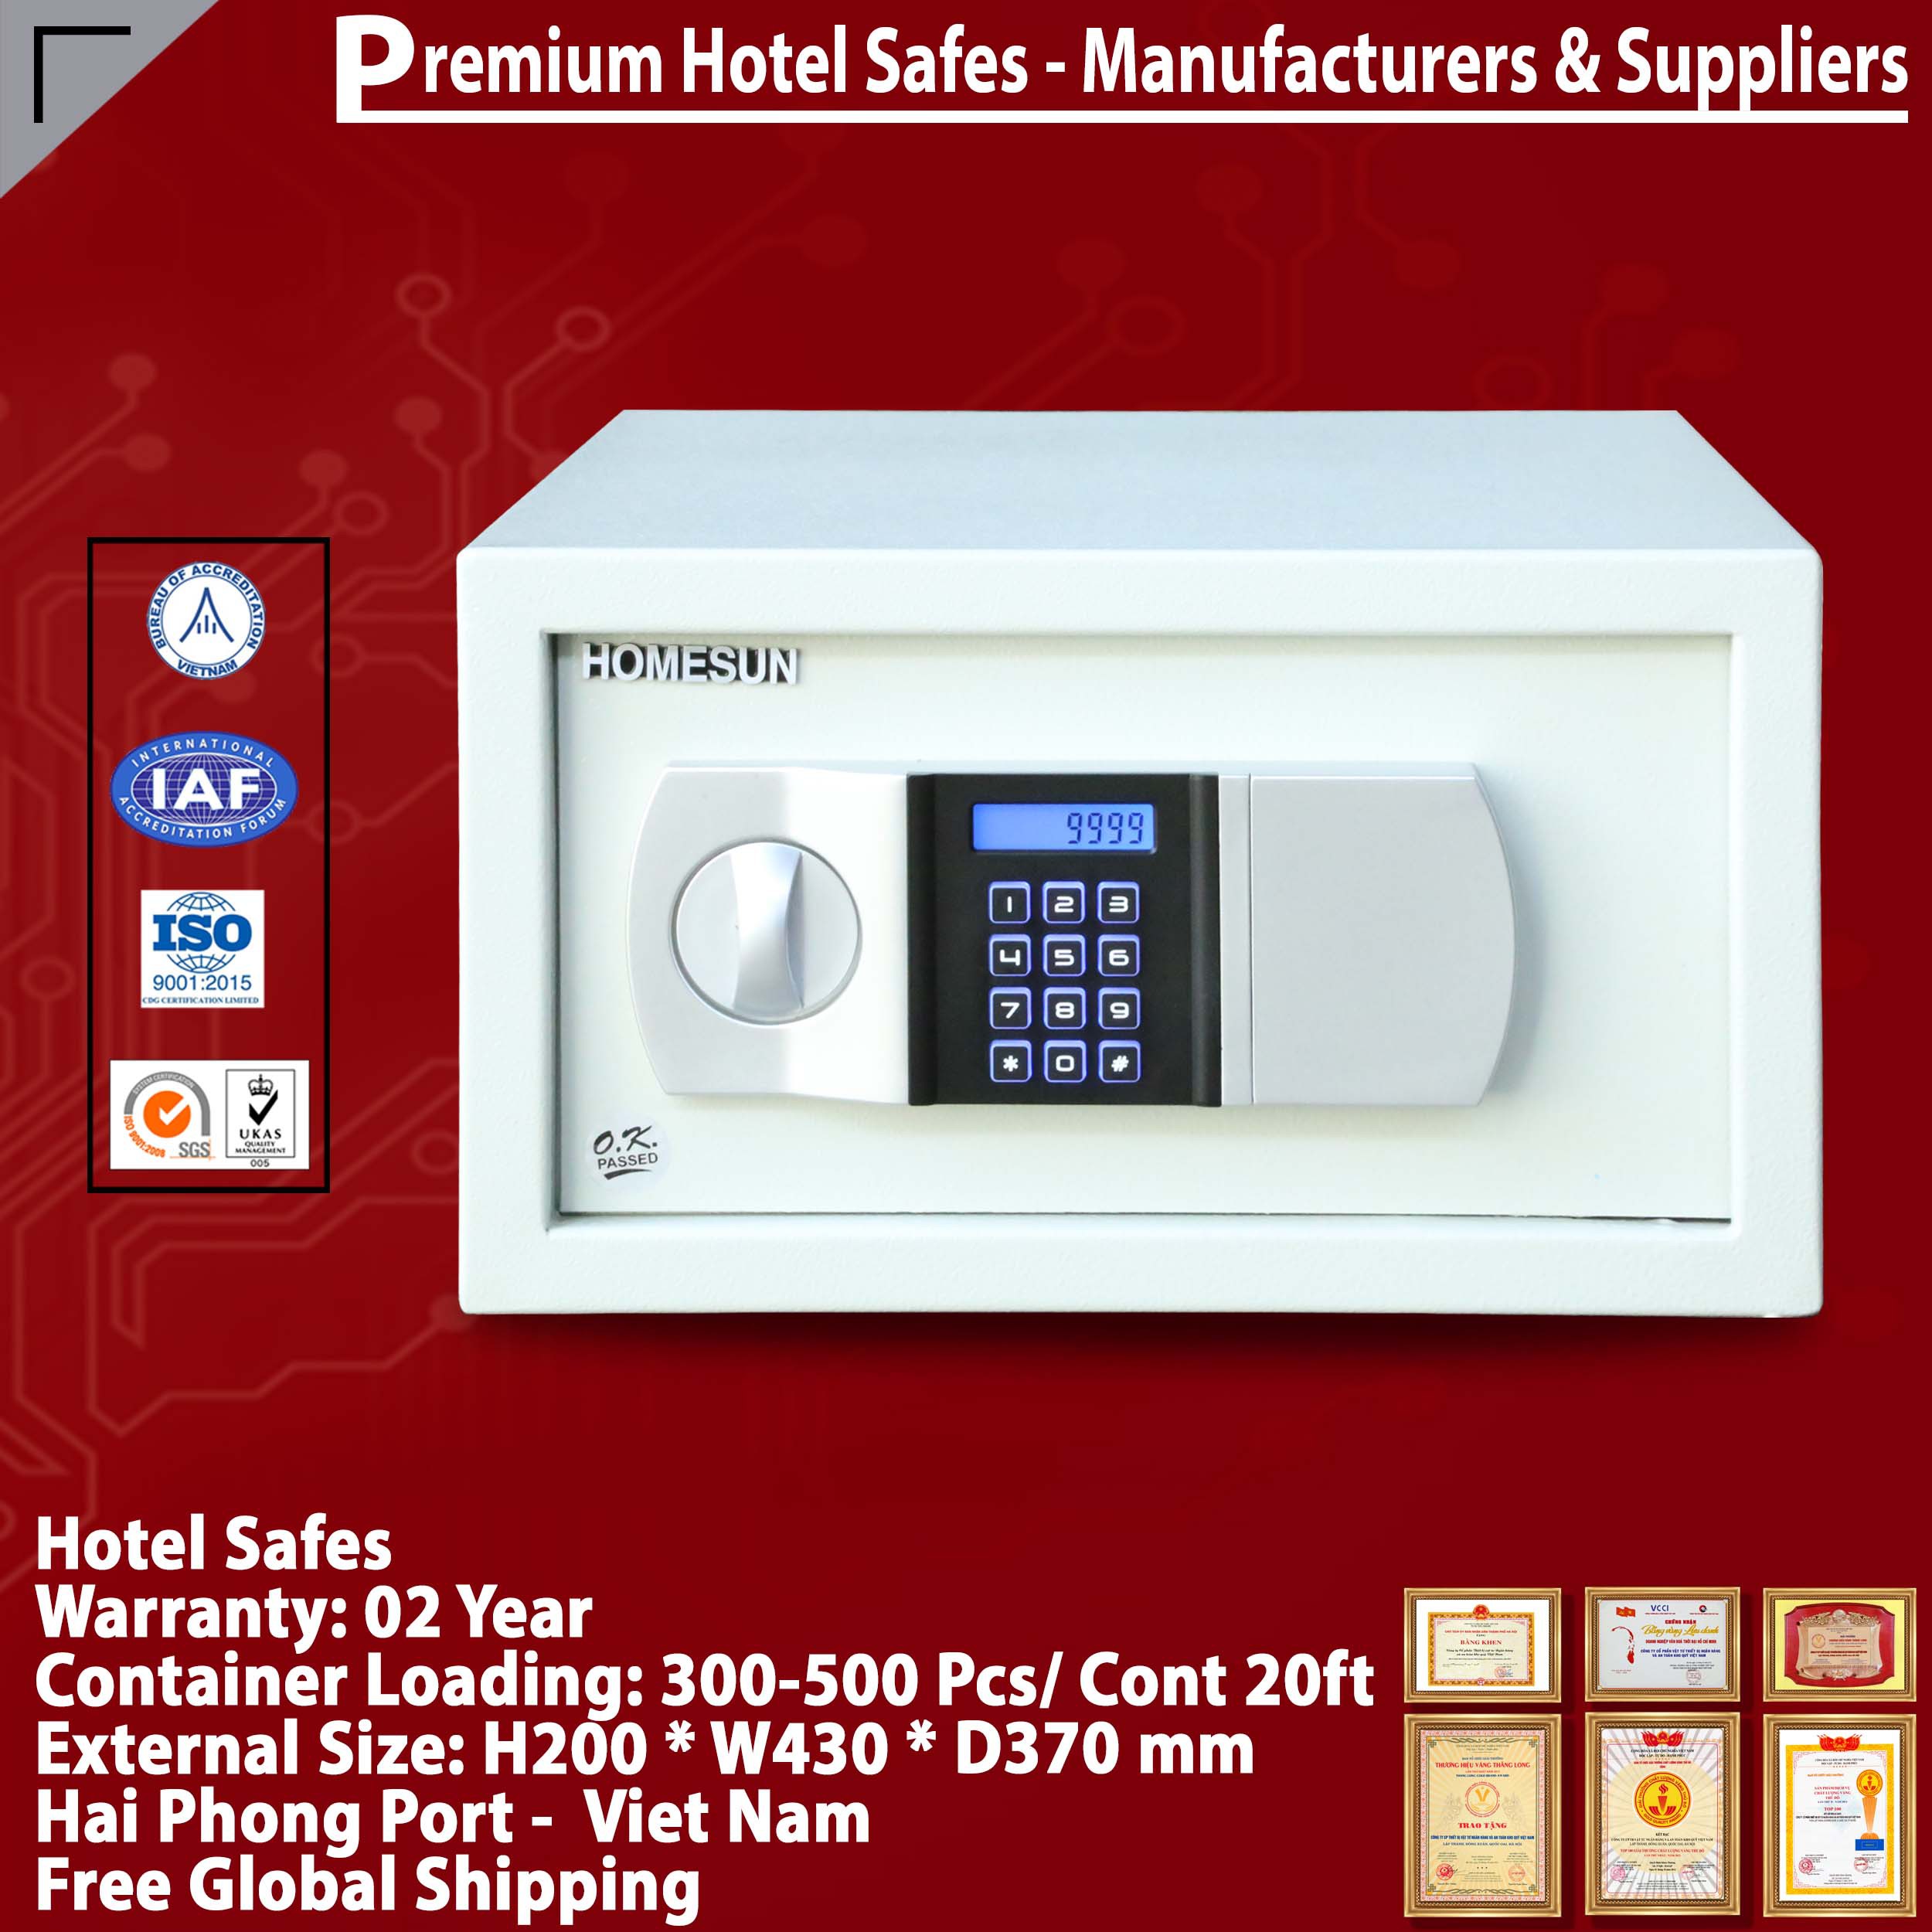 Buy Hotel Safety Deposit Box Factory Direct & Fast Shipping‎, Safes For Hotels From Ireland's